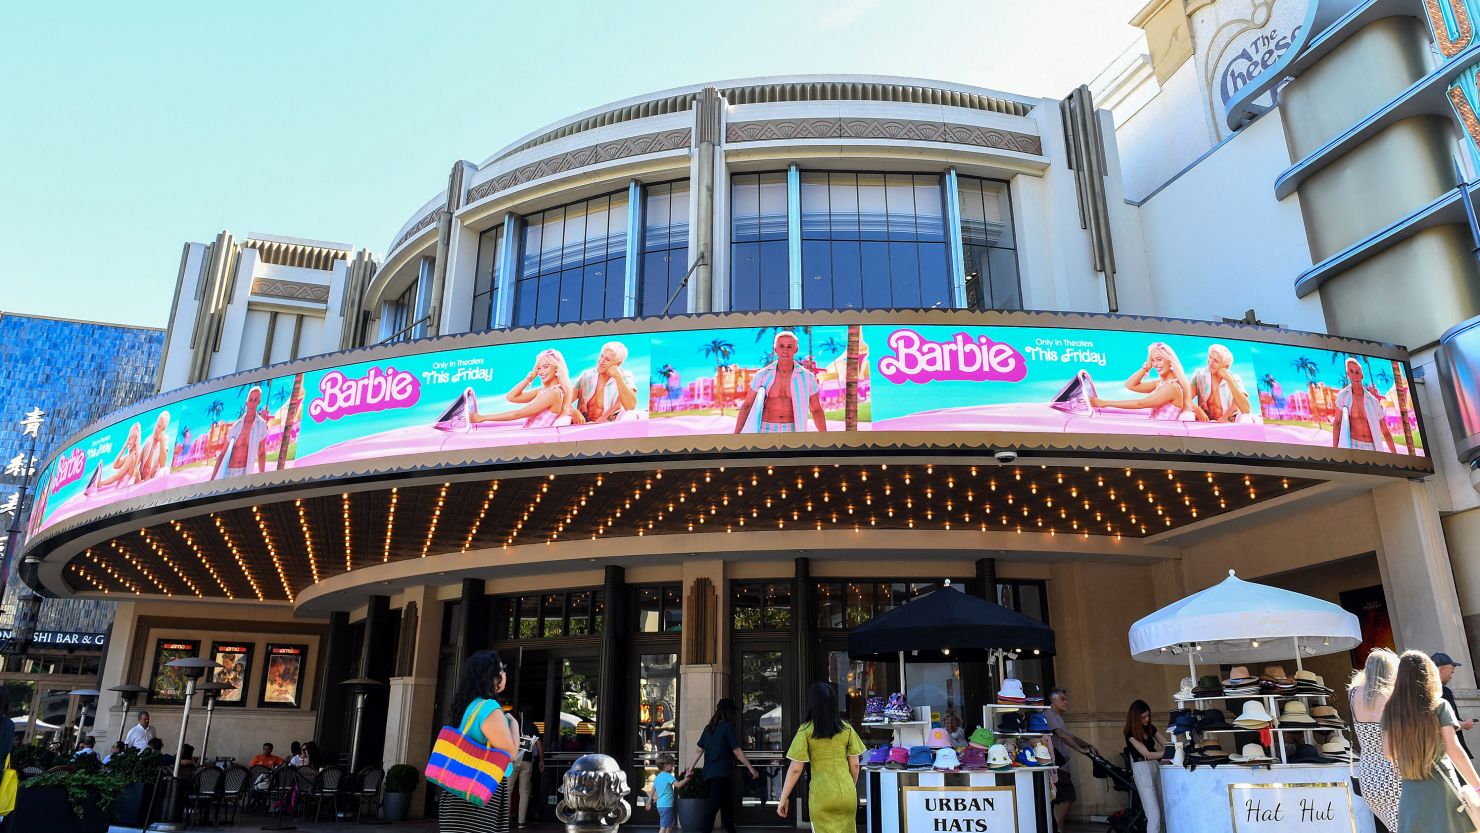 Grove's Theater marquee announcing the opening of "Barbie" movie is pictured in Los Angeles California, on July 20, 2023. "Oppenheimer" is facing off against "Barbie" in the biggest clash of Hollywood summer blockbusters, with both opening on the same day in a duel the media has dubbed "Barbenheimer".